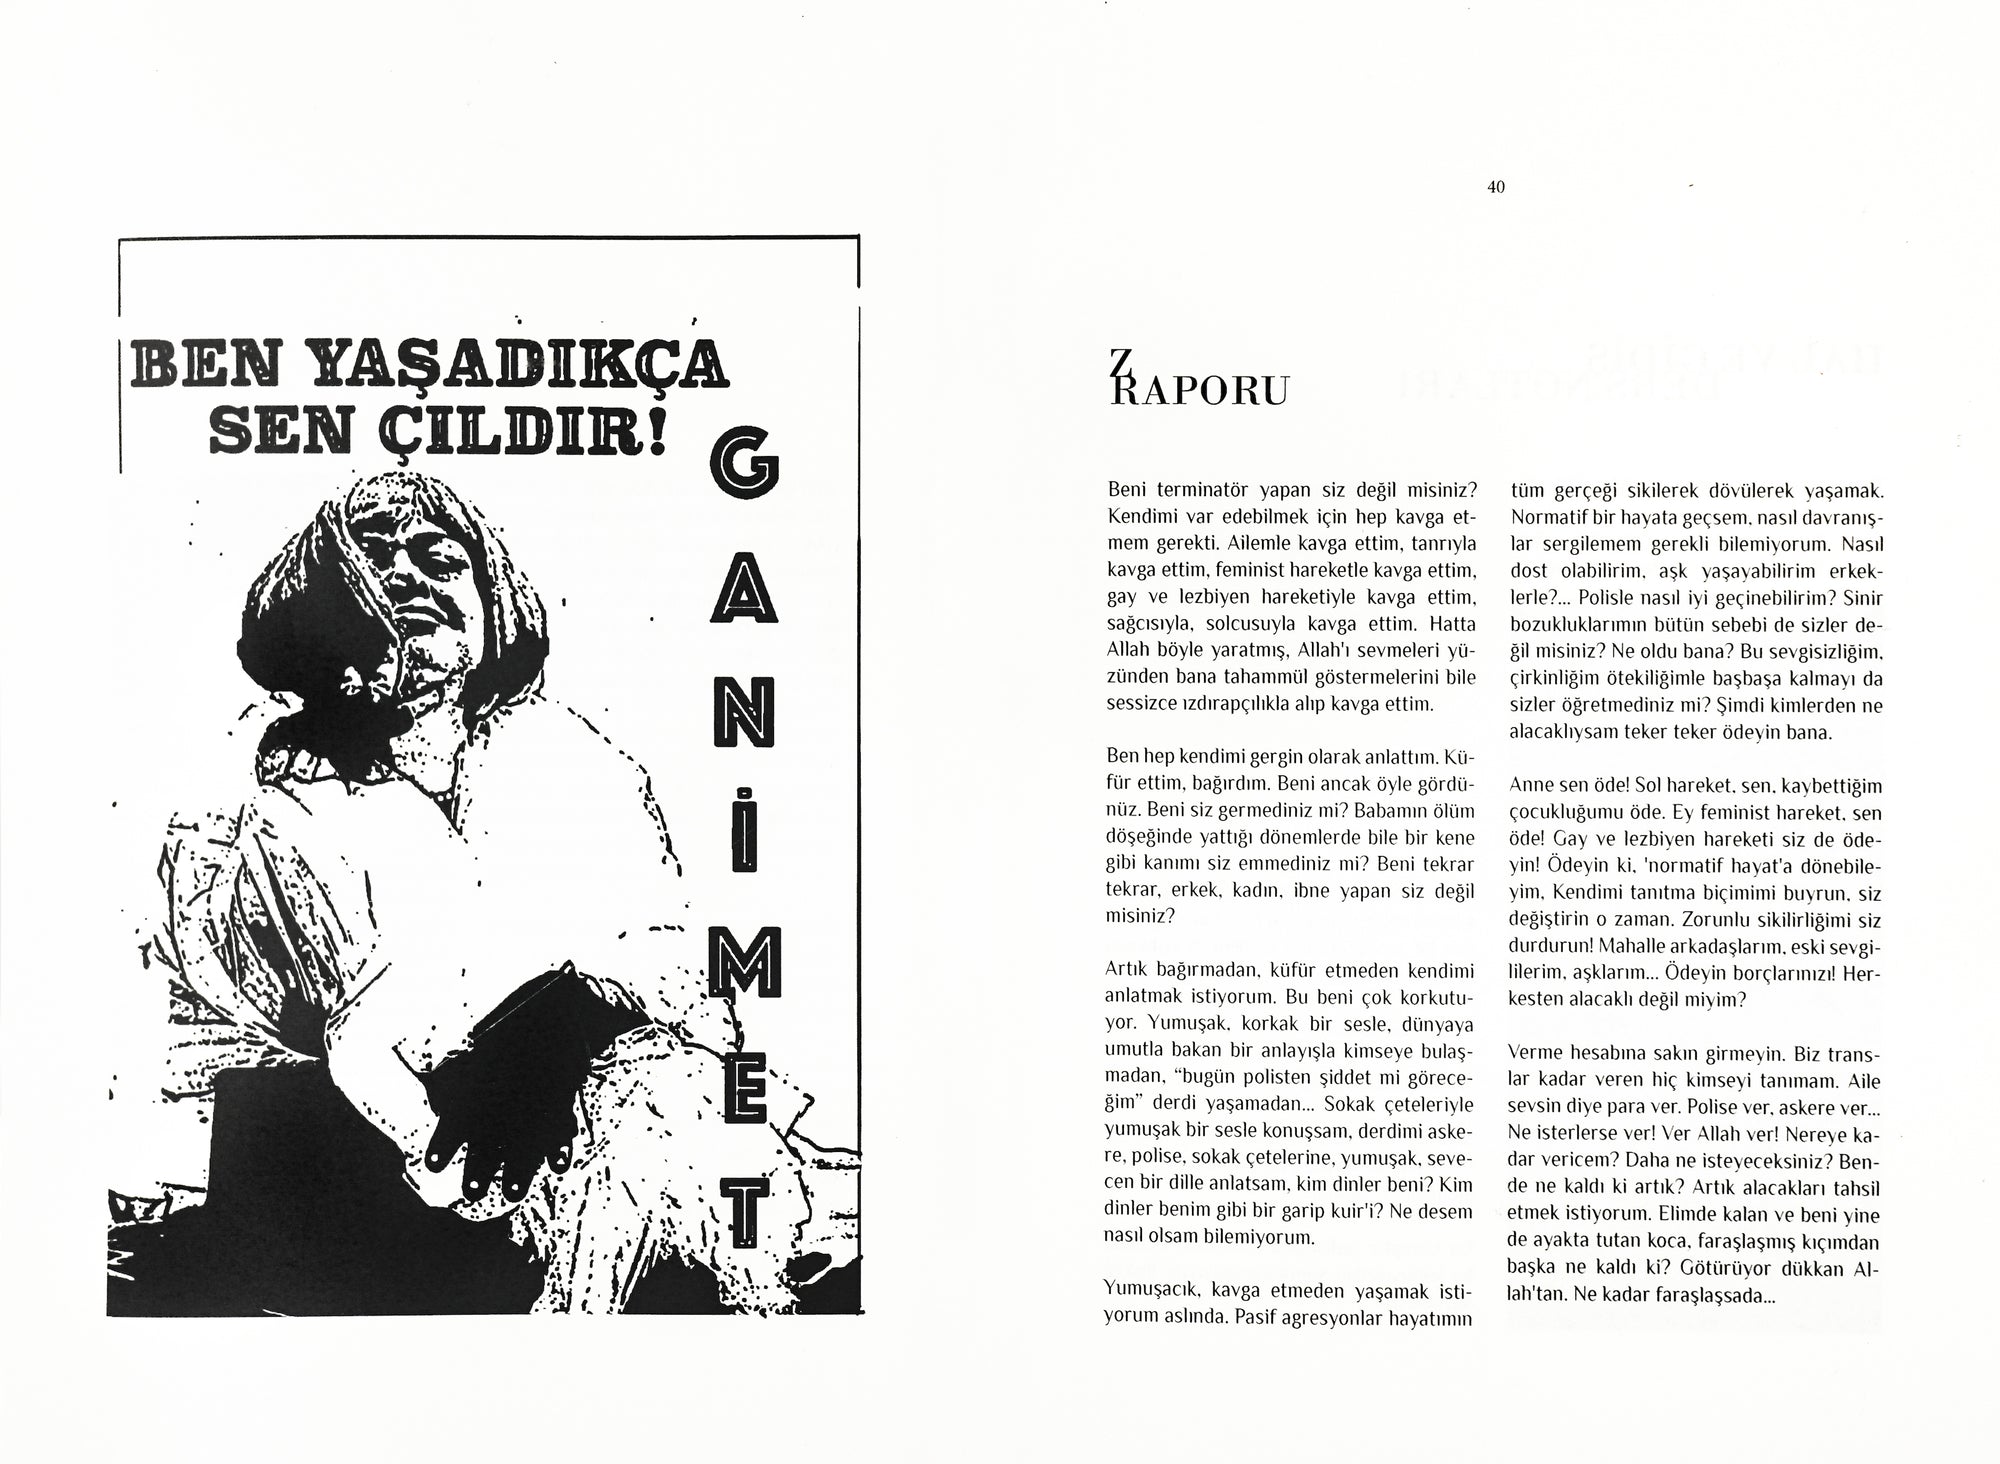 Spread with a piece of writing in Turkish on the right page, and on the left an illustration of a figure with bold, letterpress-style text in Turkish